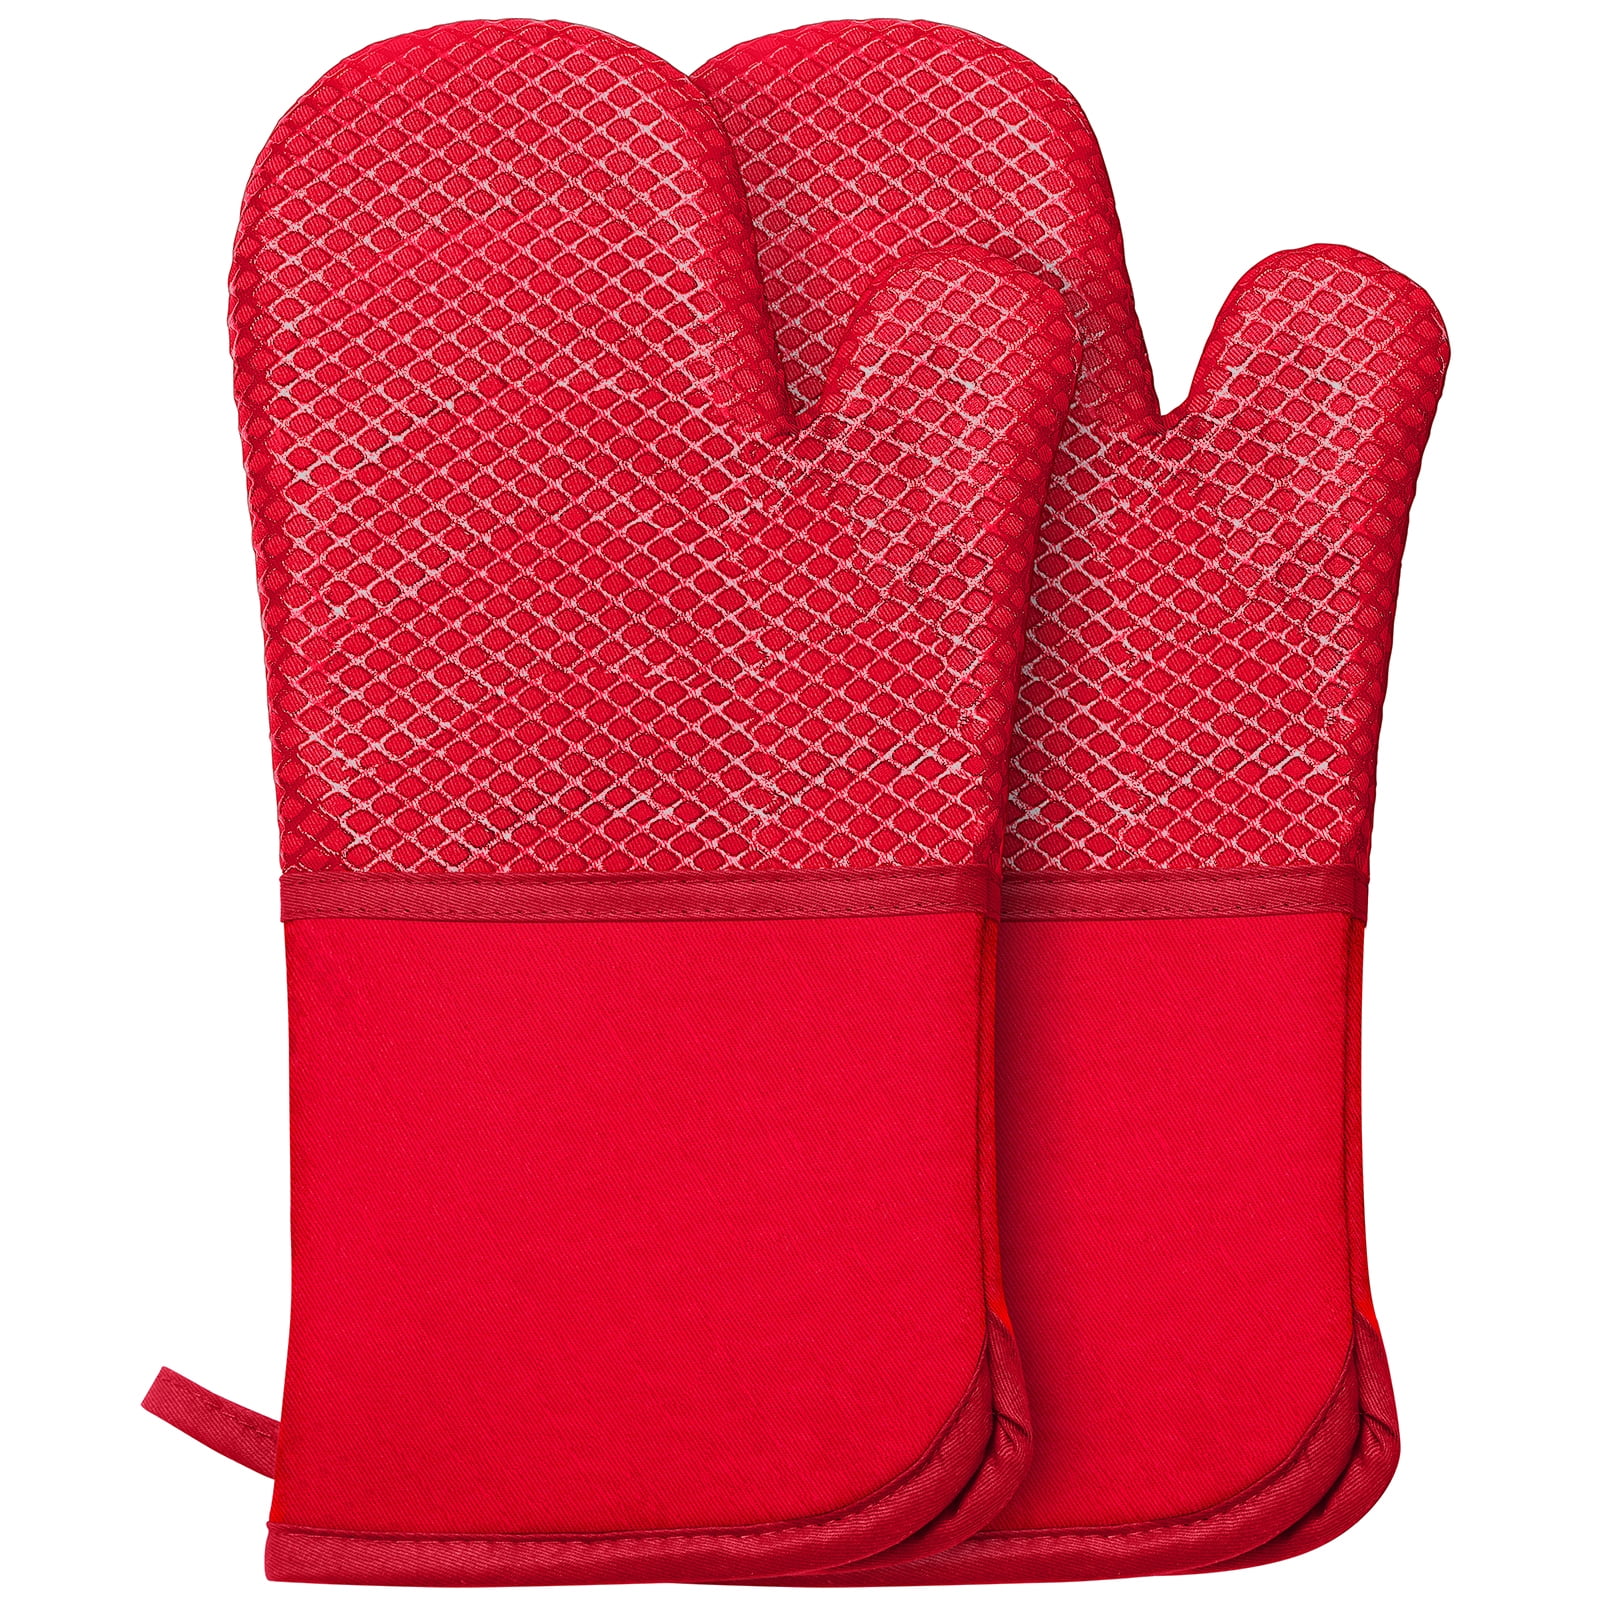 Oven Mitts, Heat Resistant Kitchen Oven Gloves 572°F, Non-Slip Silicone ...